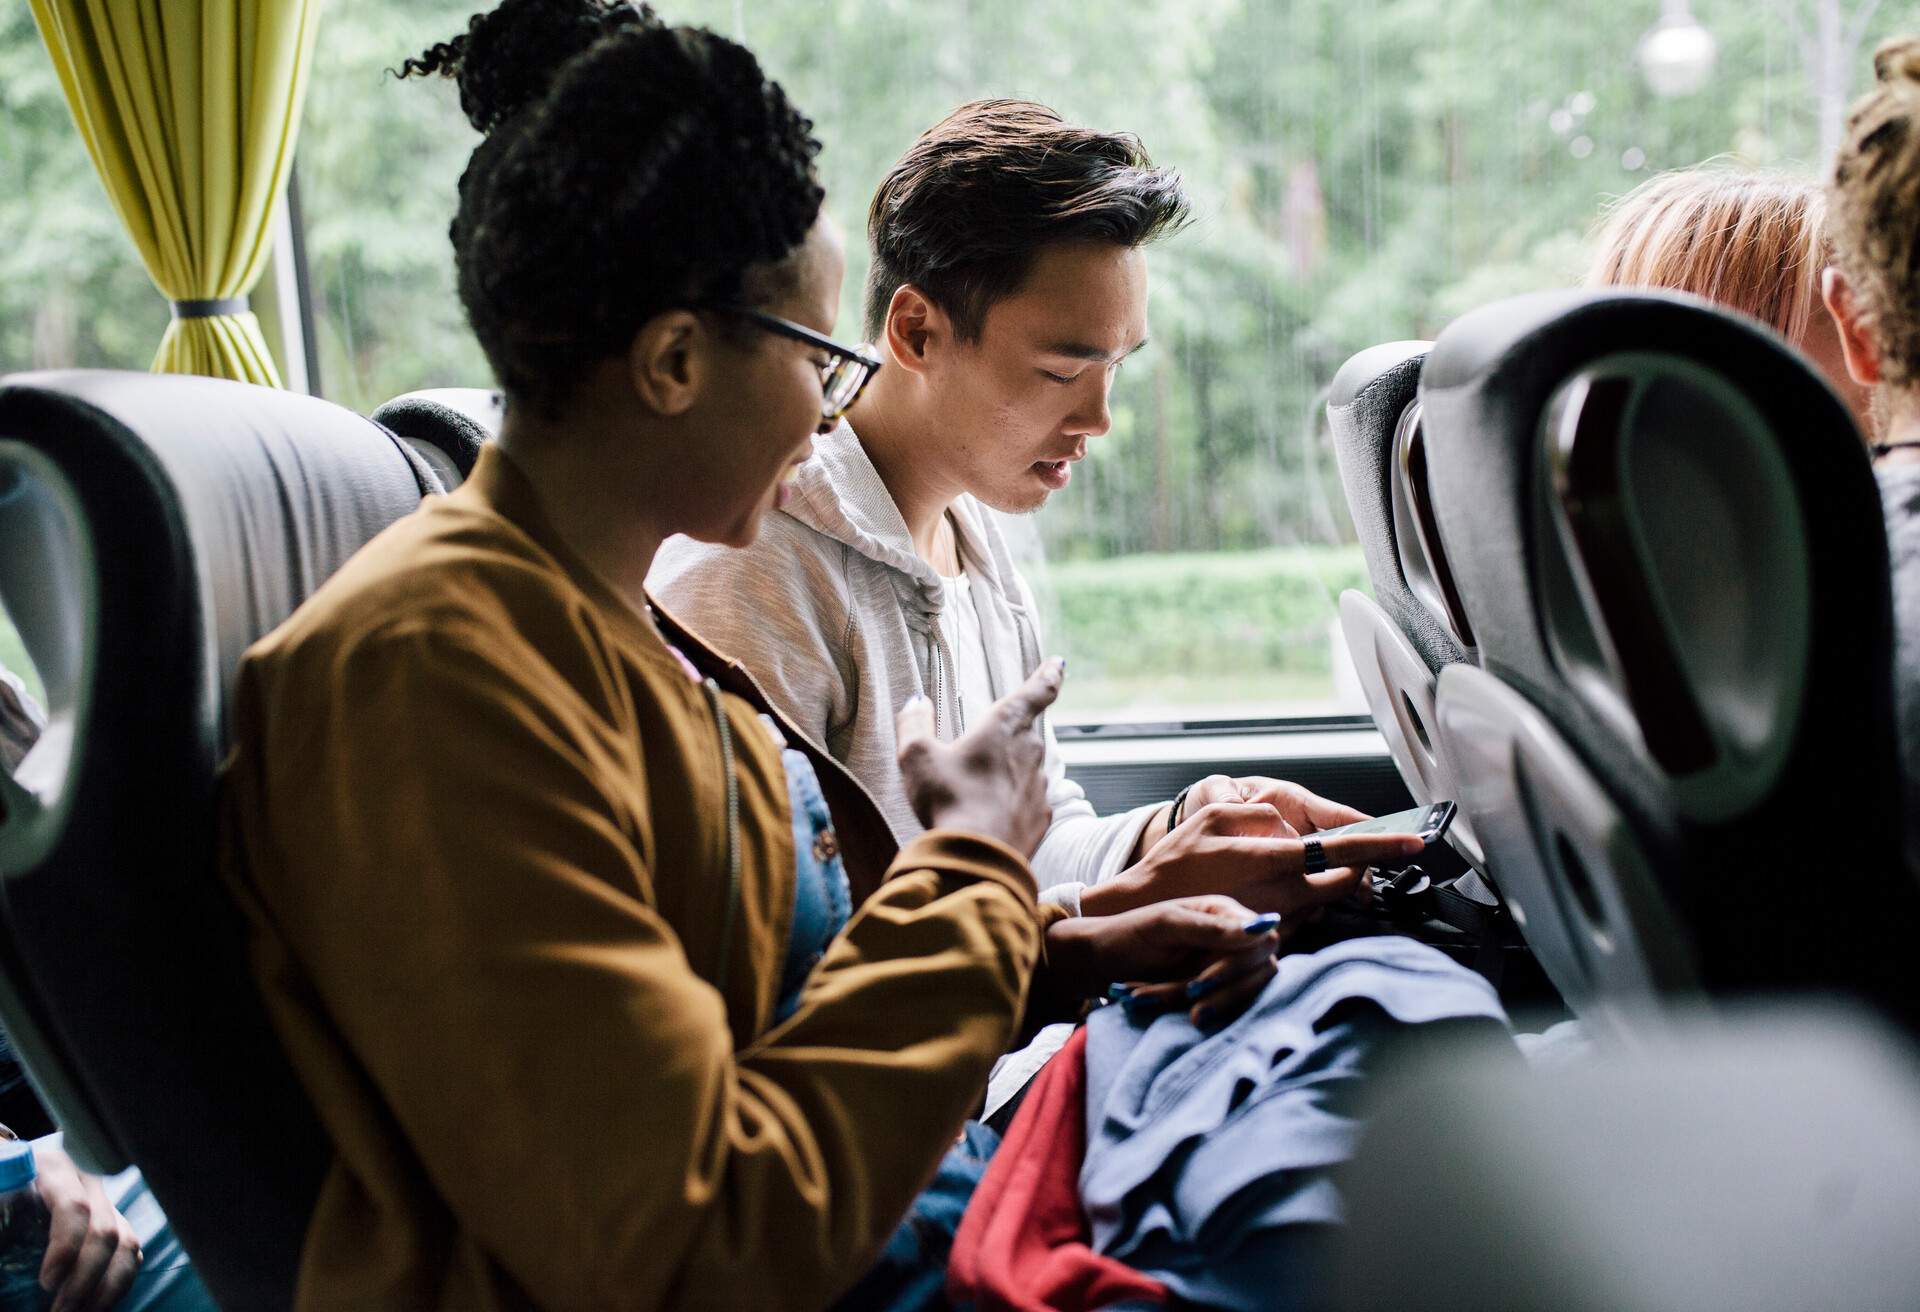 THEME_BUS_COACH_TRAVEL_PEOPLE_FRIENDS_COUPLE_DEVICE_GettyImages-700137192